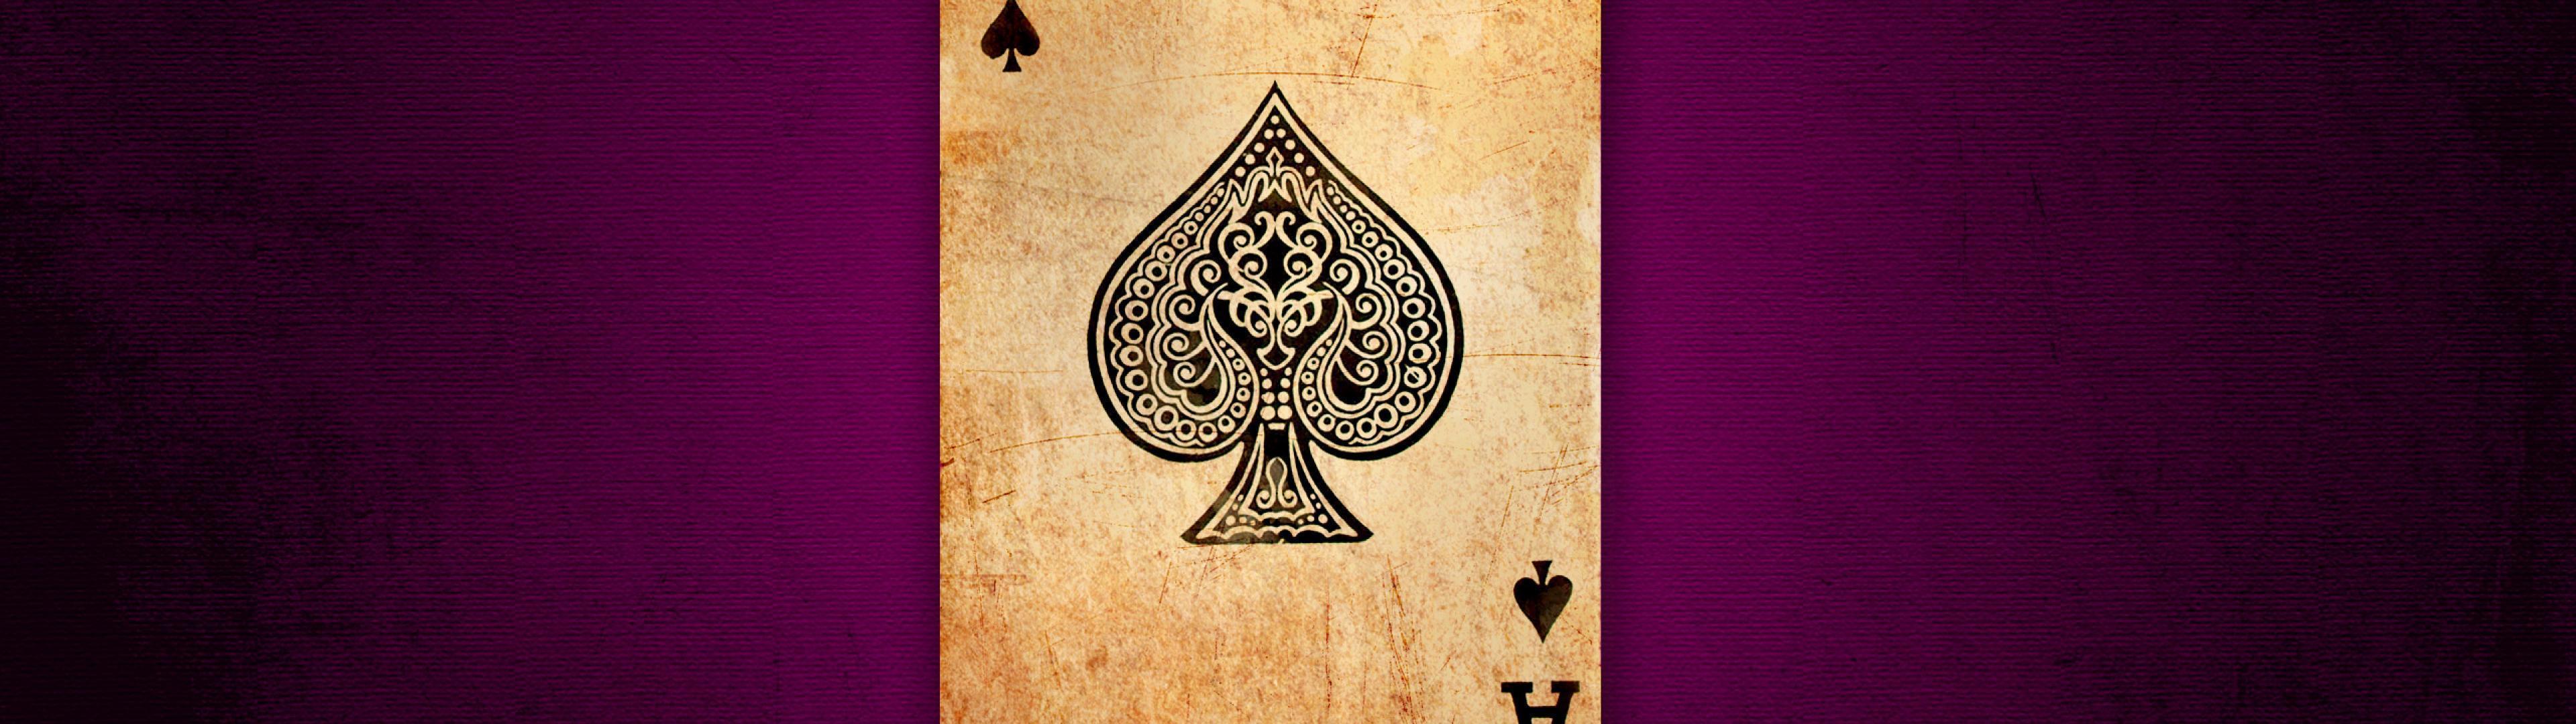 Card Ace Of Spades Wallpaper Car Picture